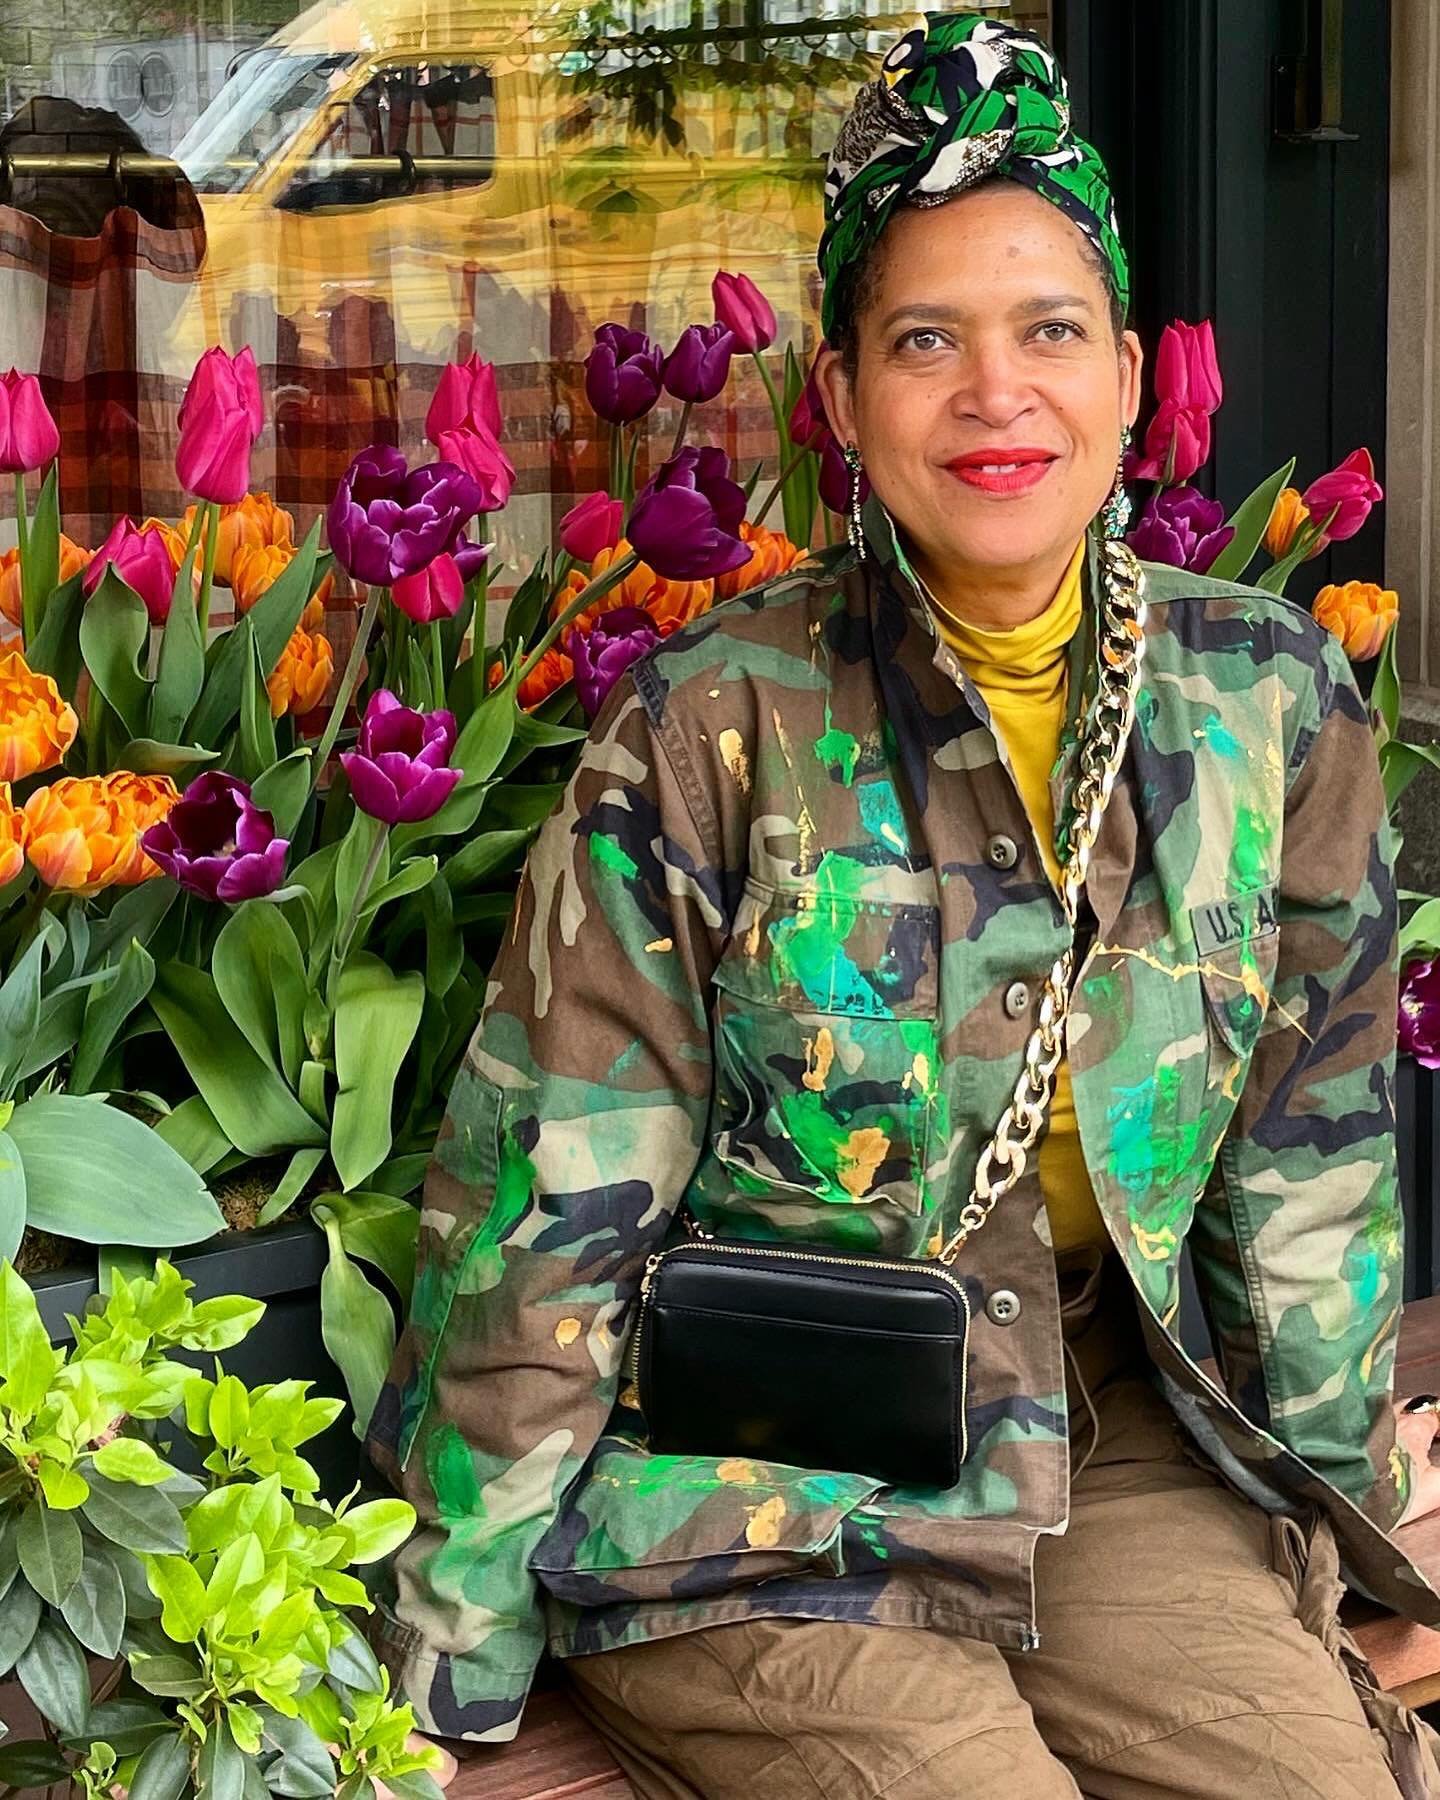 #fashionflashbackfriday 1 year ago today when I wore this fab painted military jacket by the very talented @heidibarongodoff Looking forward to breaking it out this spring! 💚💚💚💚💚💚💚